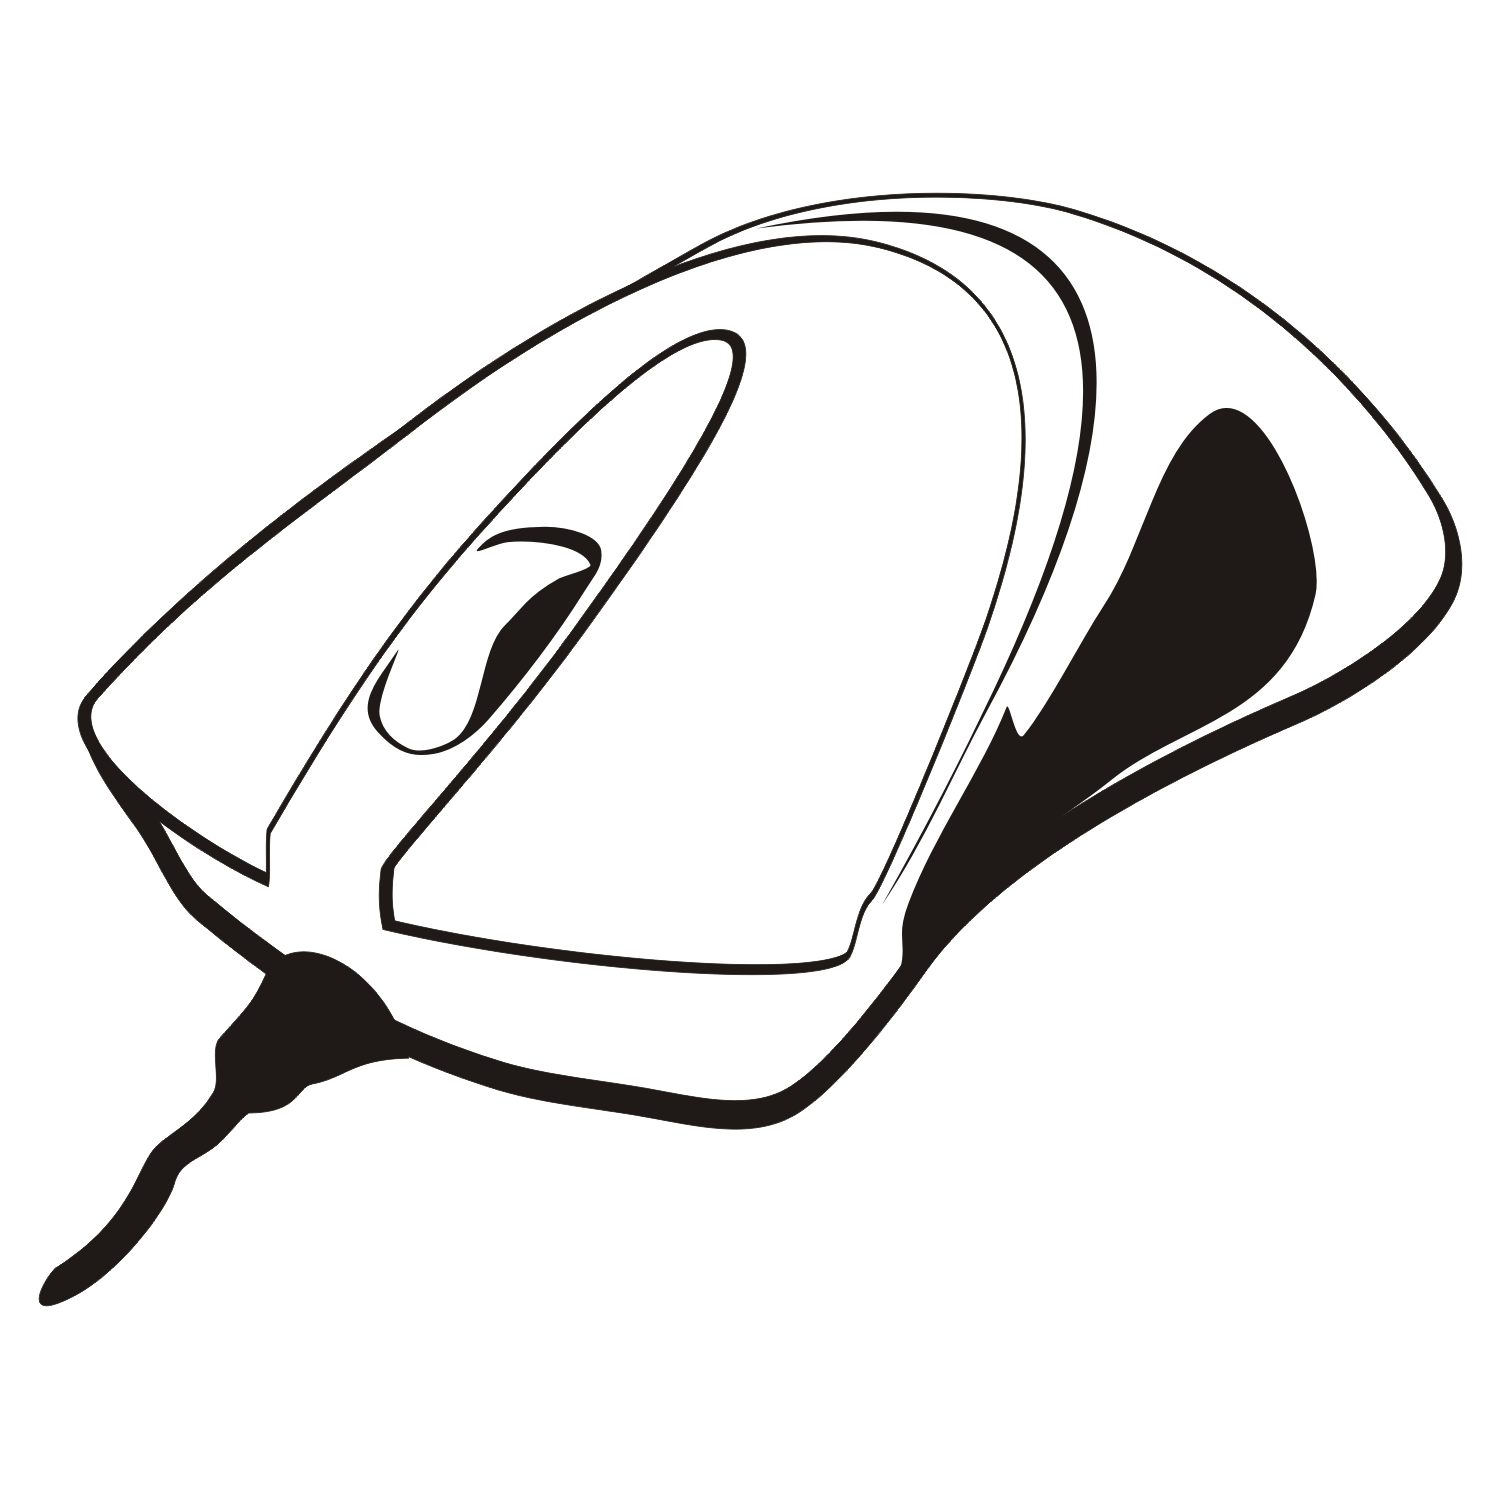 Computer Mouse Vector | Clipart Panda - Free Clipart Images